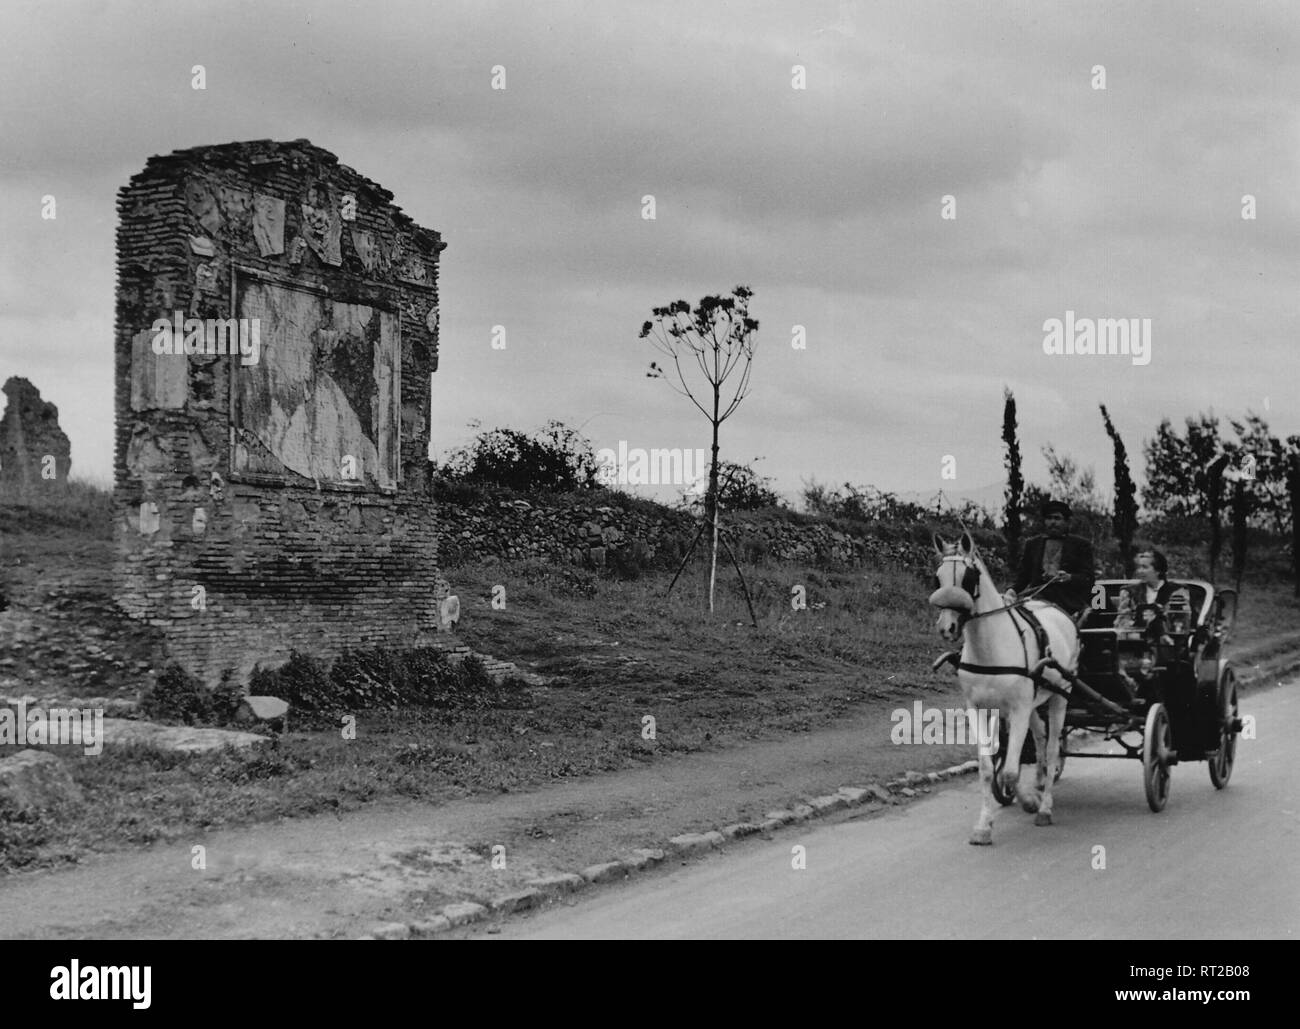 Travel to Rome - Italy in 1950s - carriage on the Via Appia Antica  near Rome. Kutsche auf der Via Appia Antica bei Rom, Italien. Image taken in 1954 by Erich Andres Stock Photo